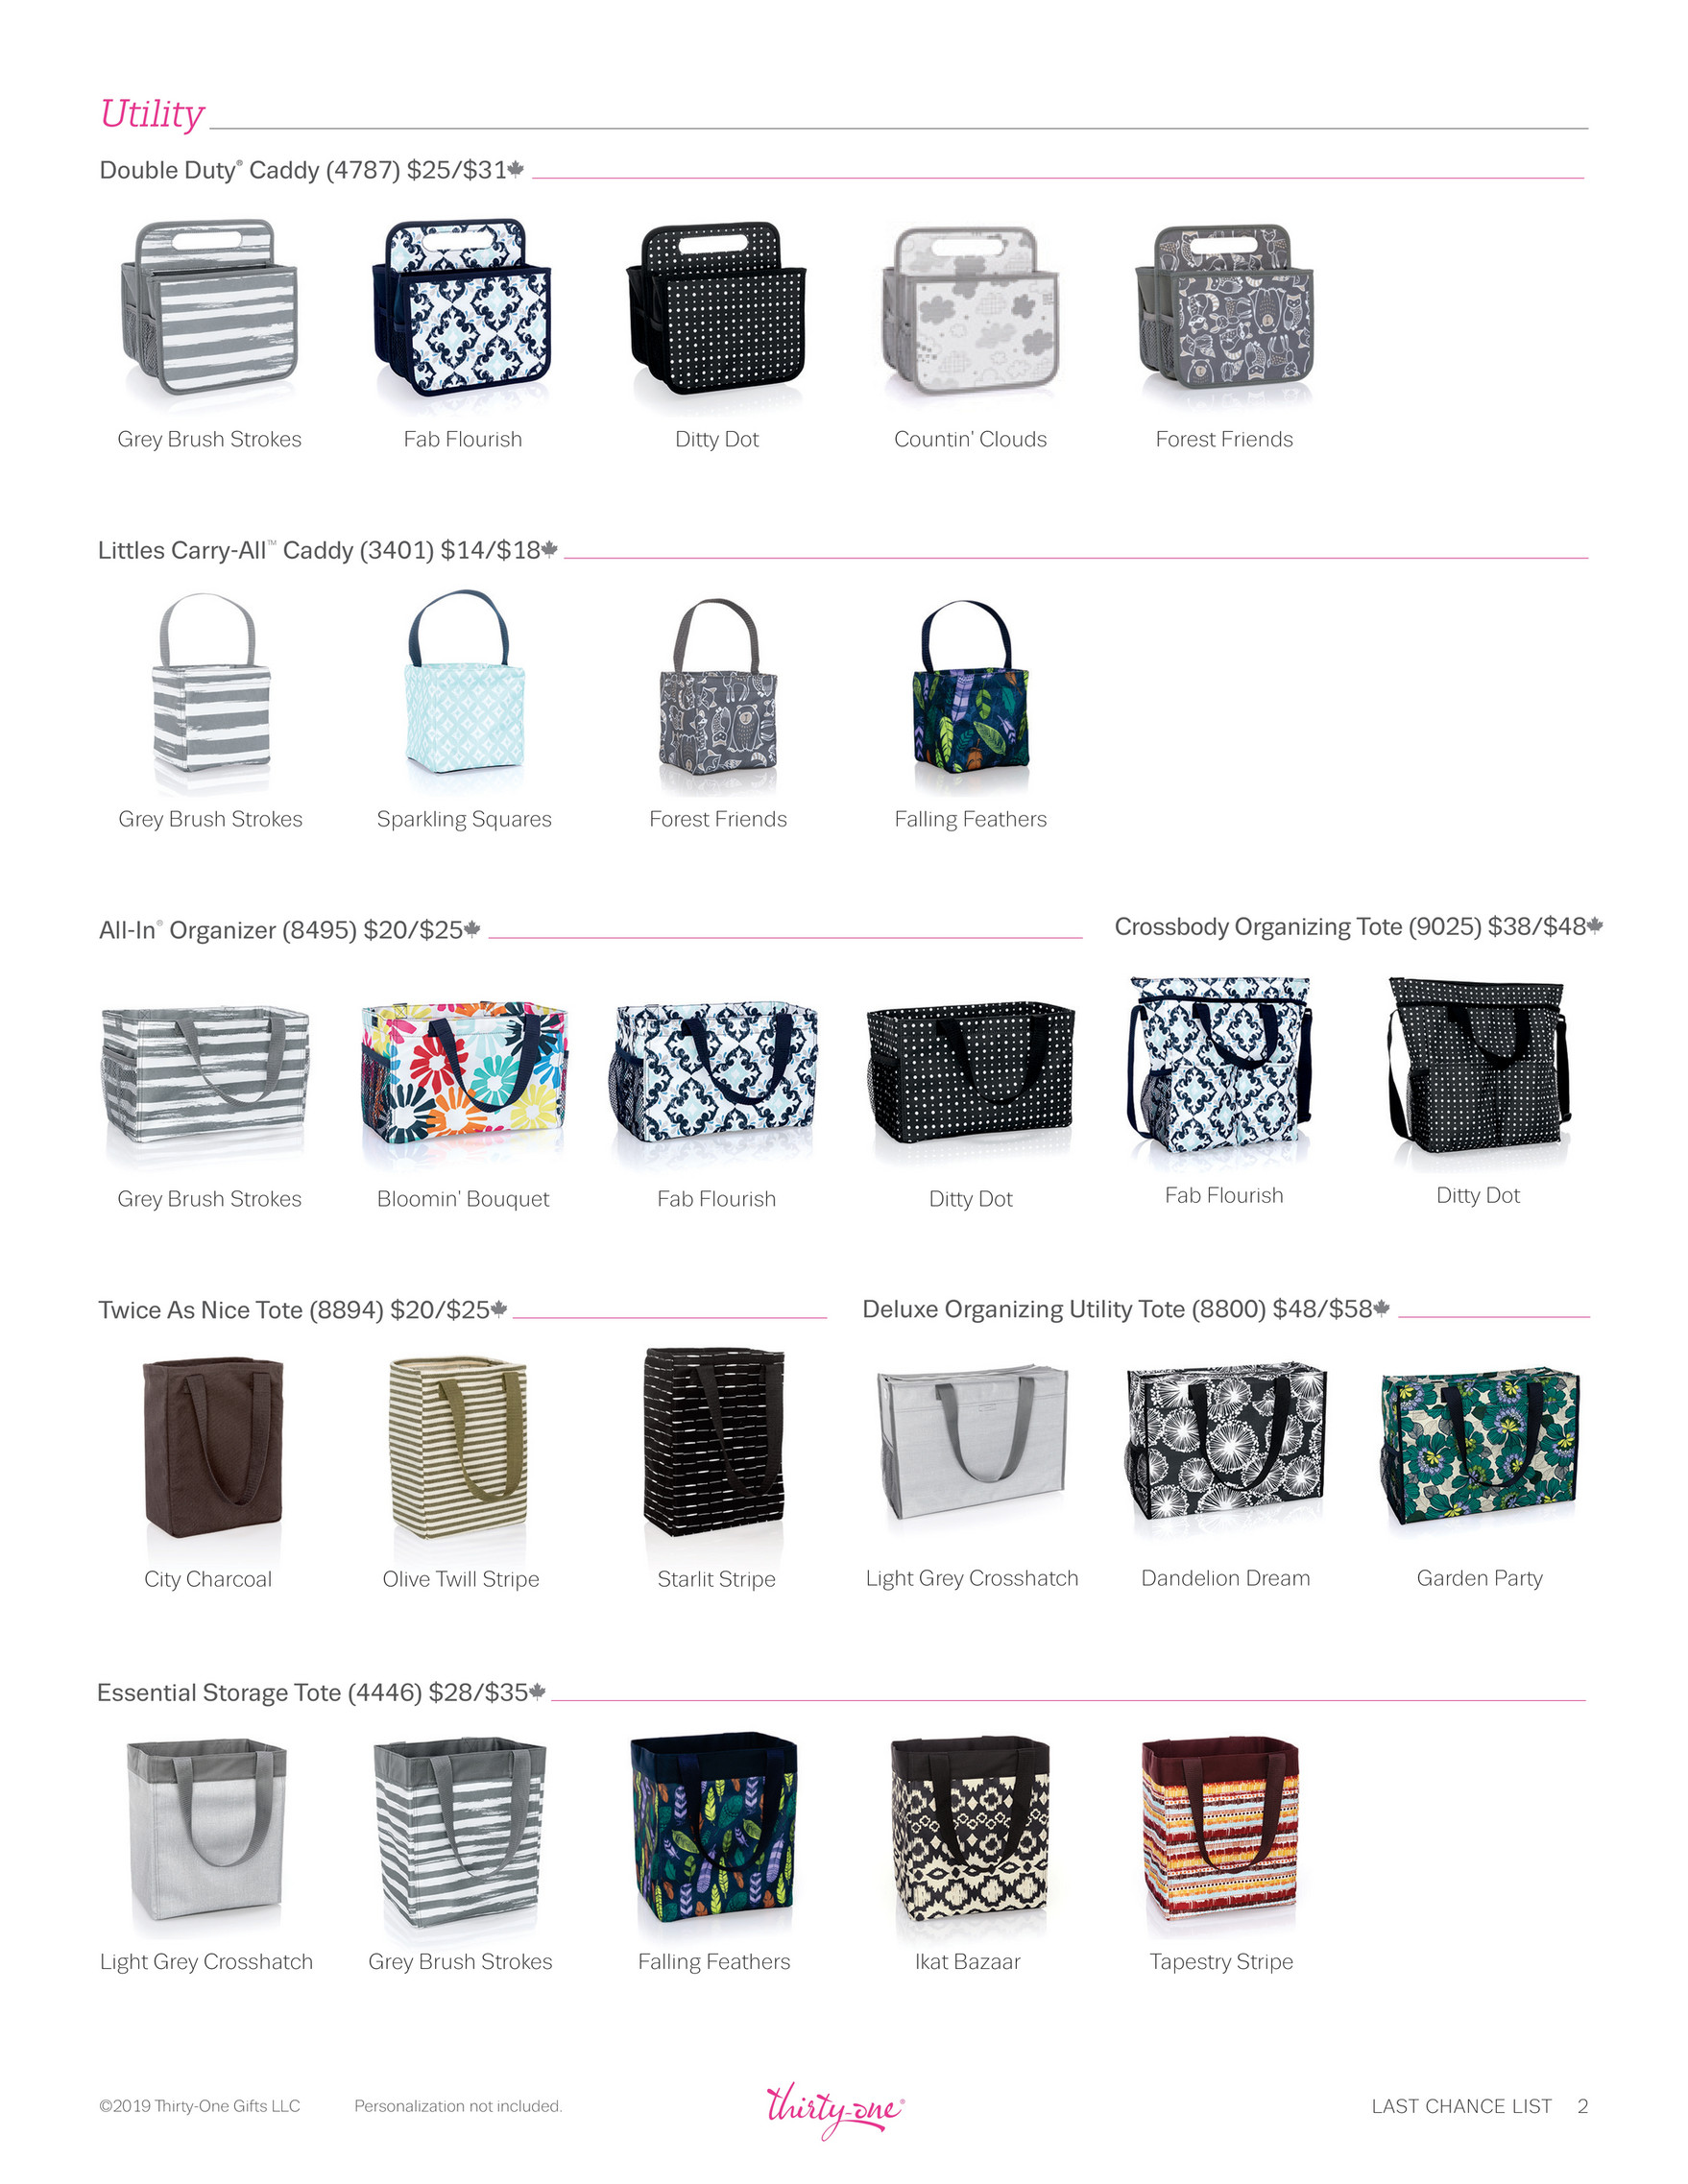 38 4theloveofbags14 Retired Thirty-One Prints and Products ideas